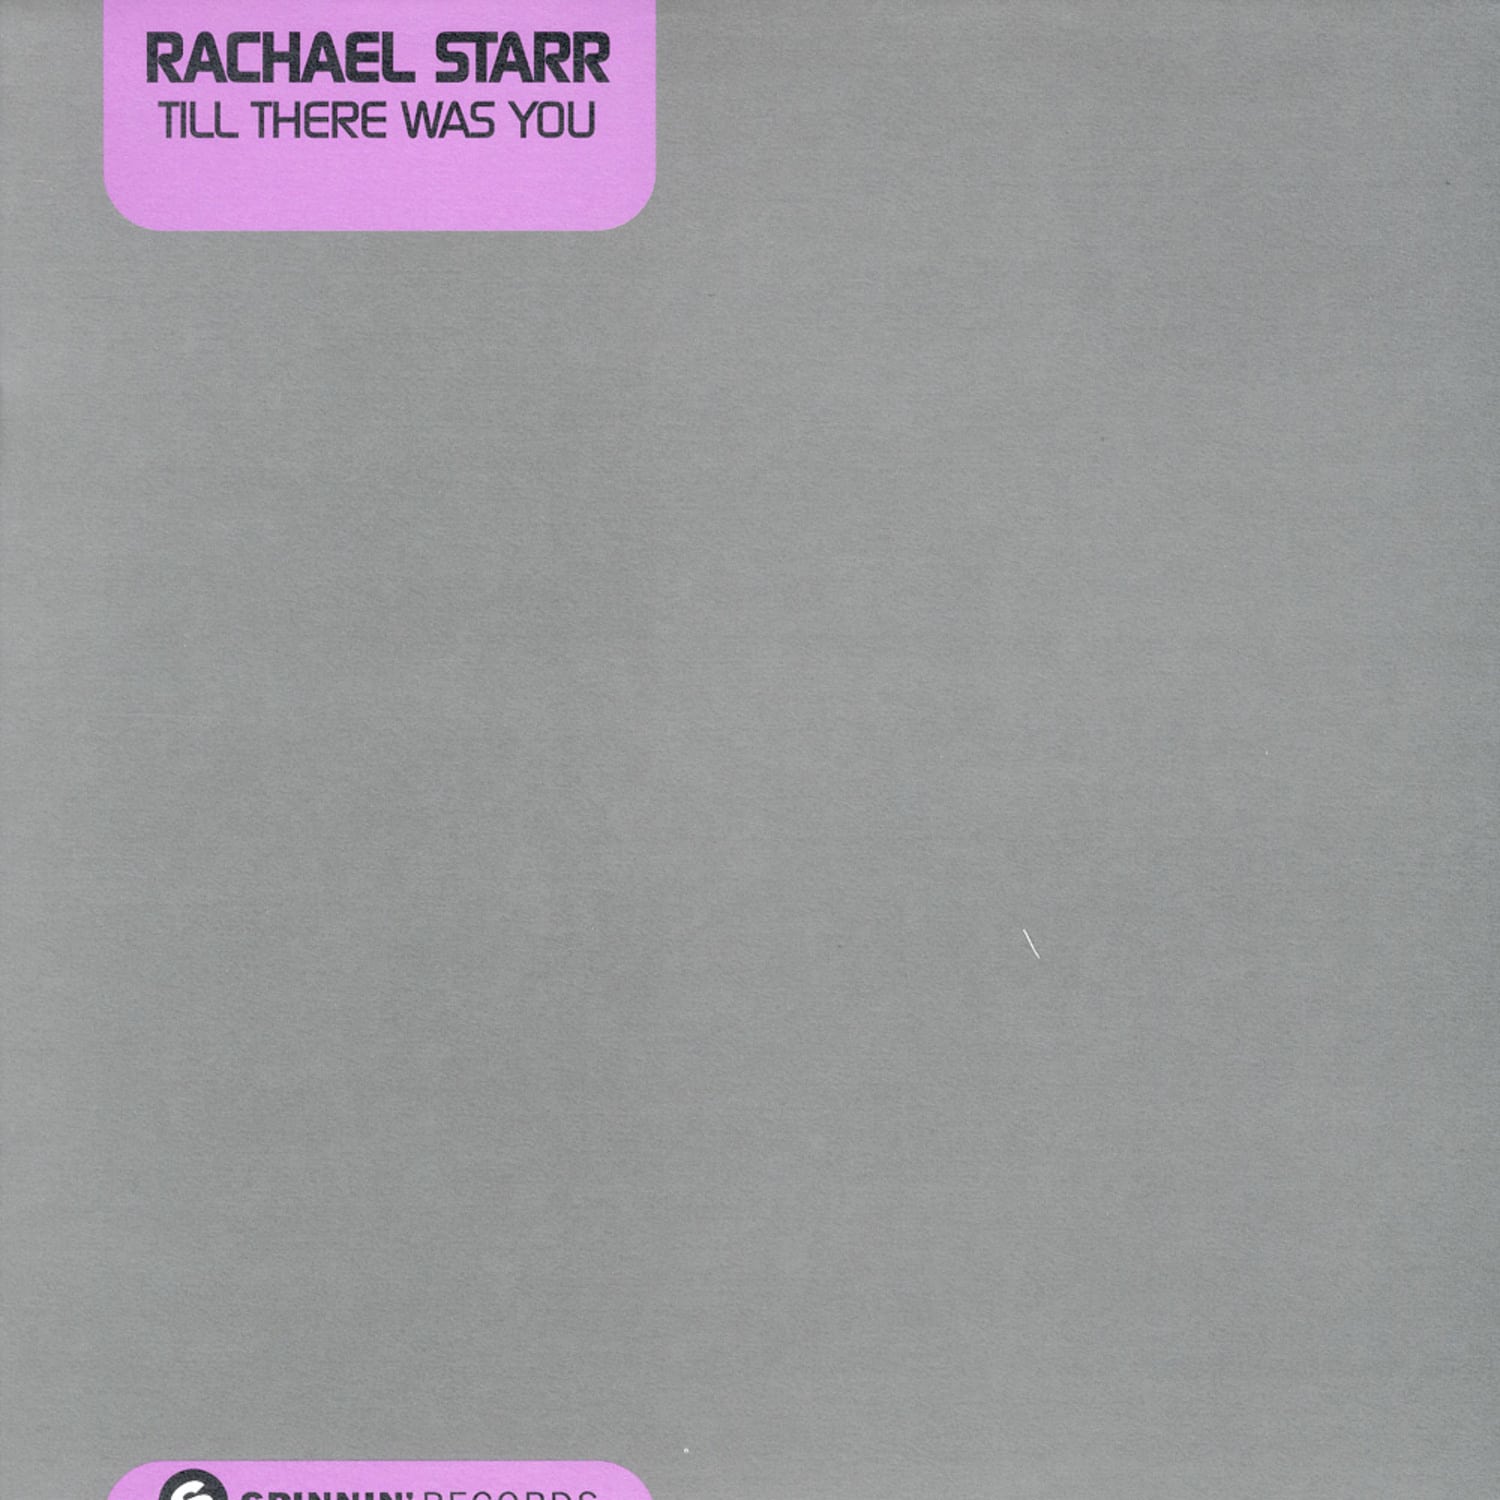 Rachael Starr - TILL THERE WAS YOU